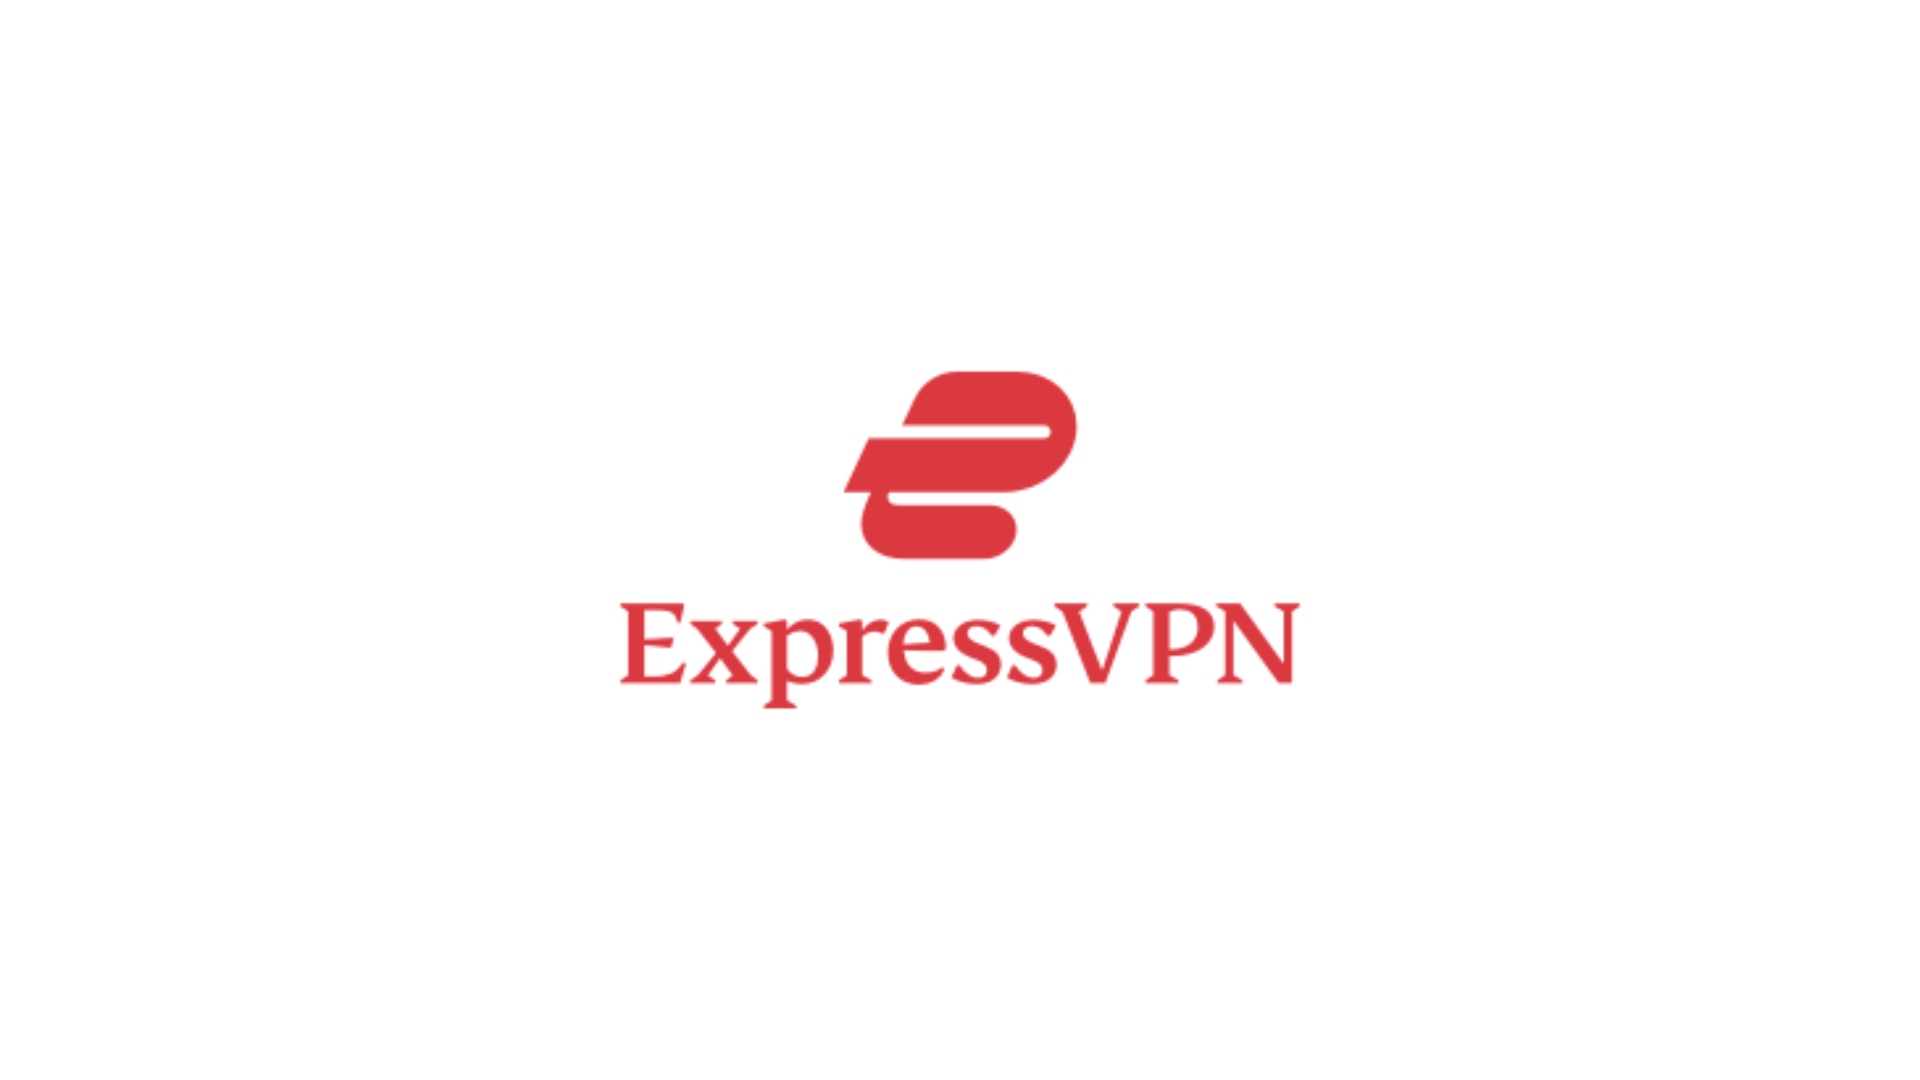 Best VPN for streaming, ExpressVPN. Its logo is shown on a white background.